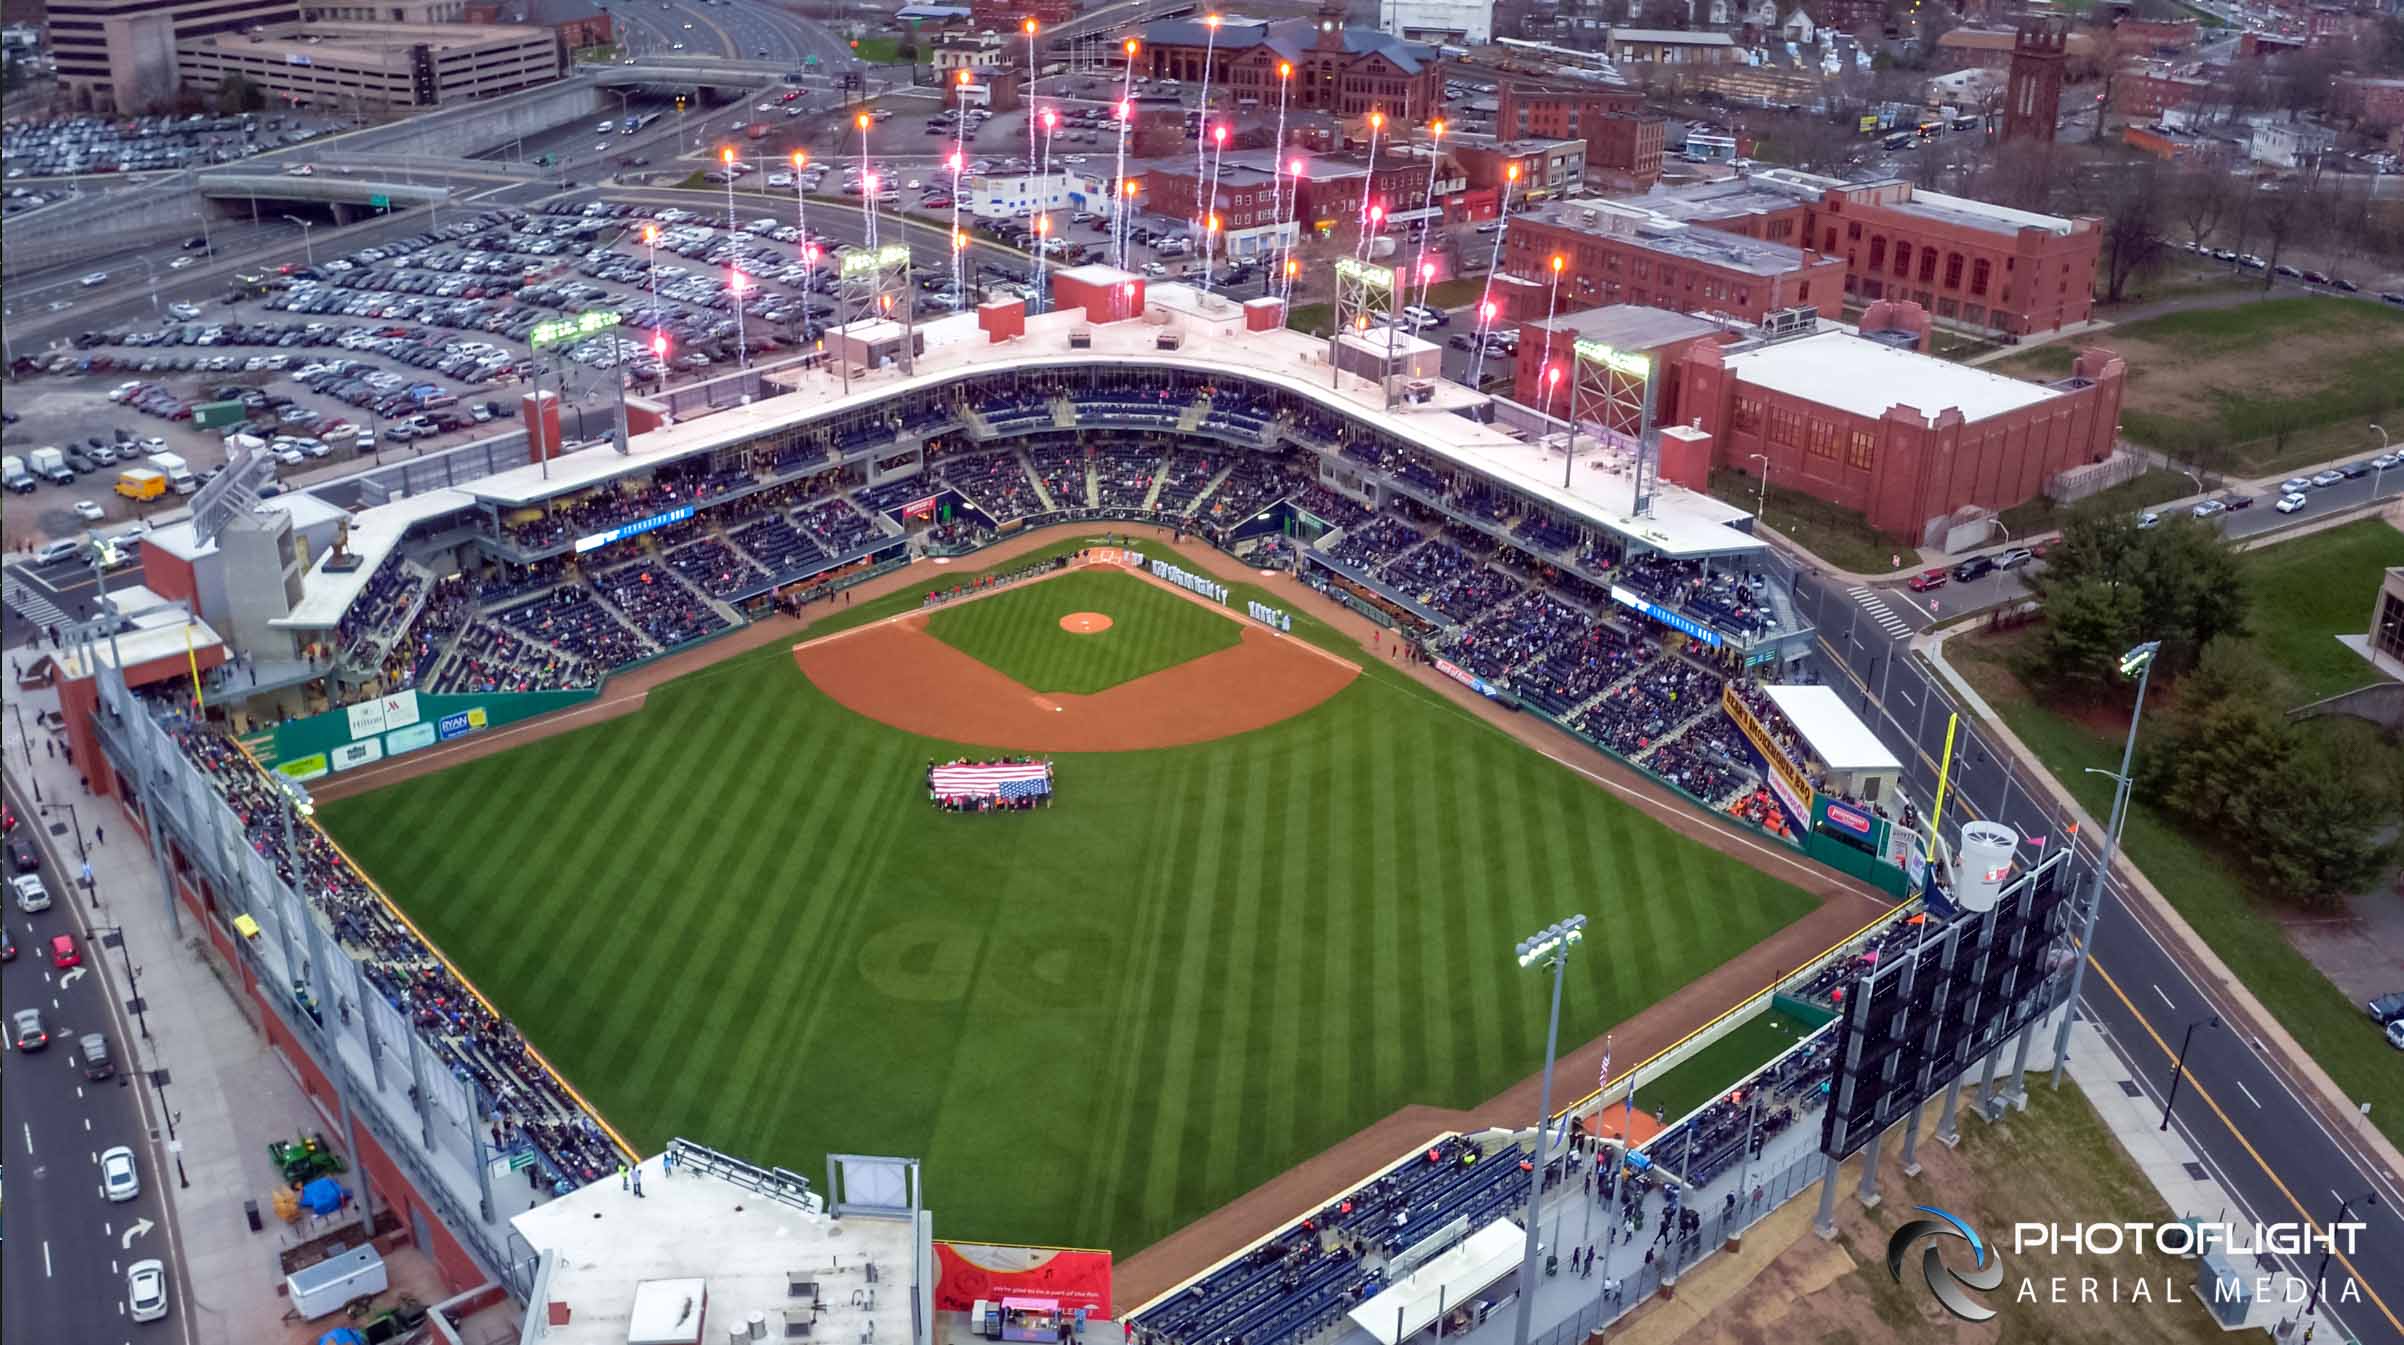 Live News Drone Coverage of Hartford Yard Goats Opening Game